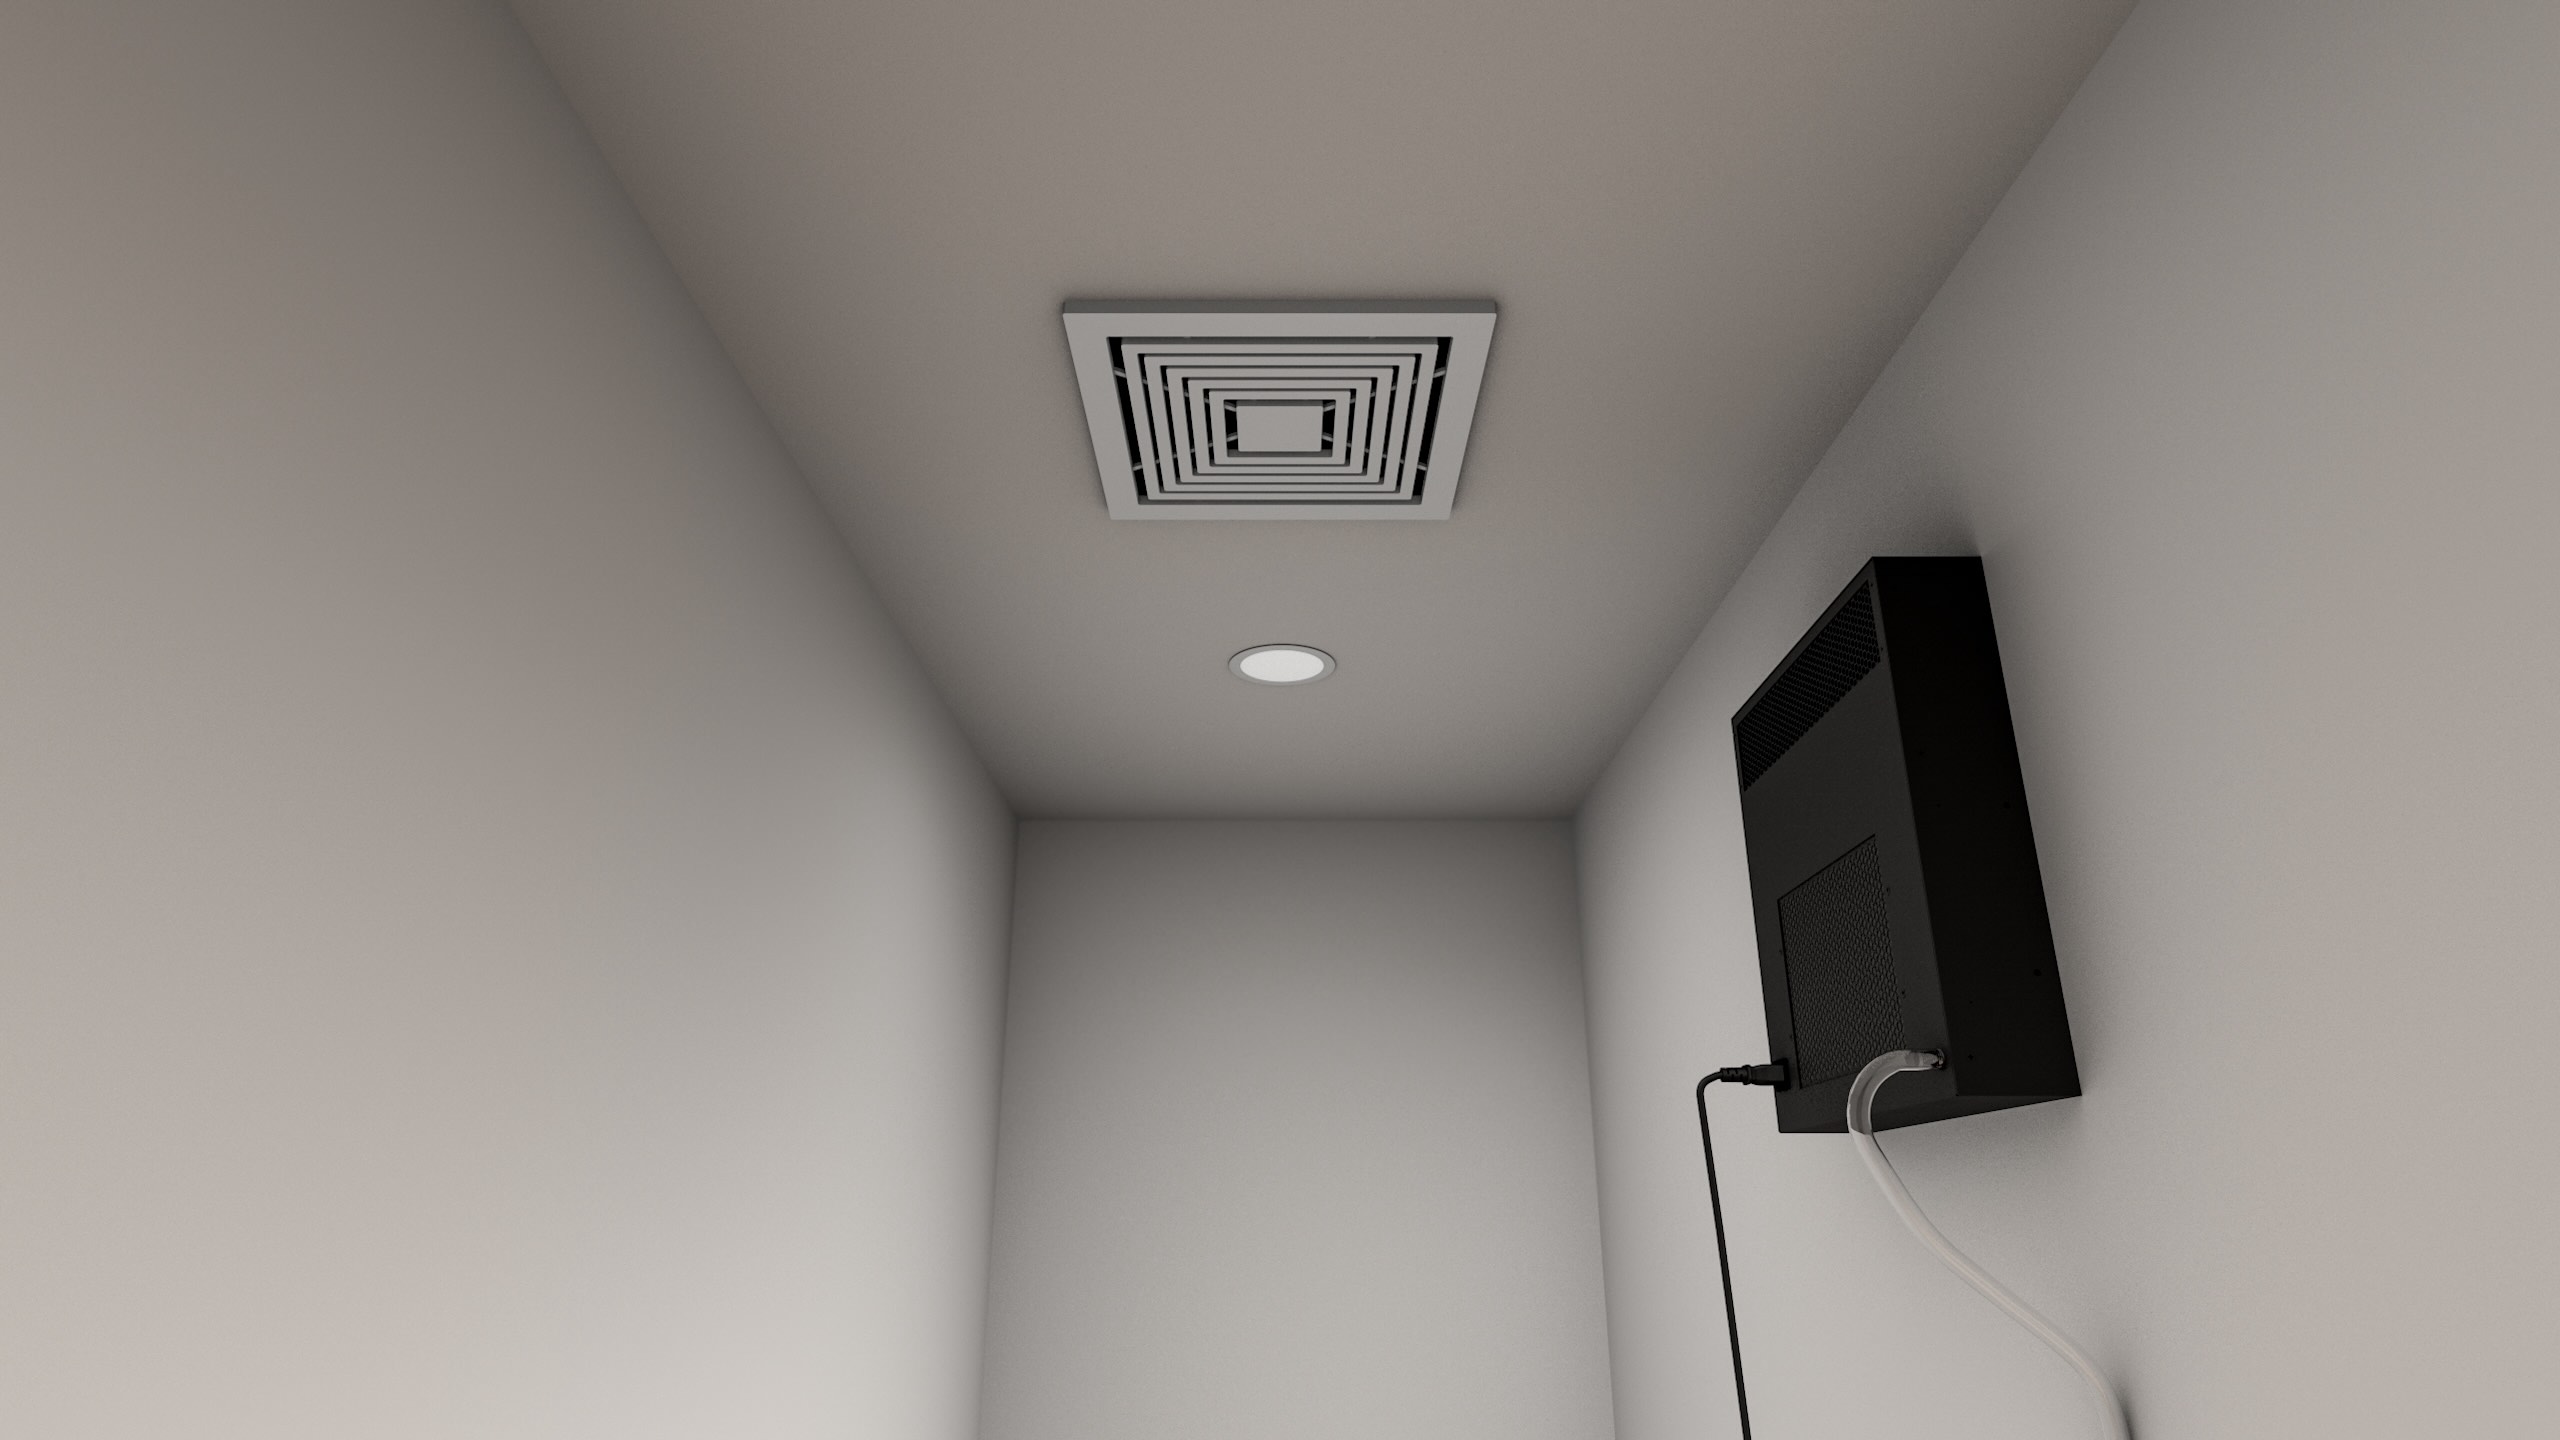 How To Remove Air Vent From The Ceiling